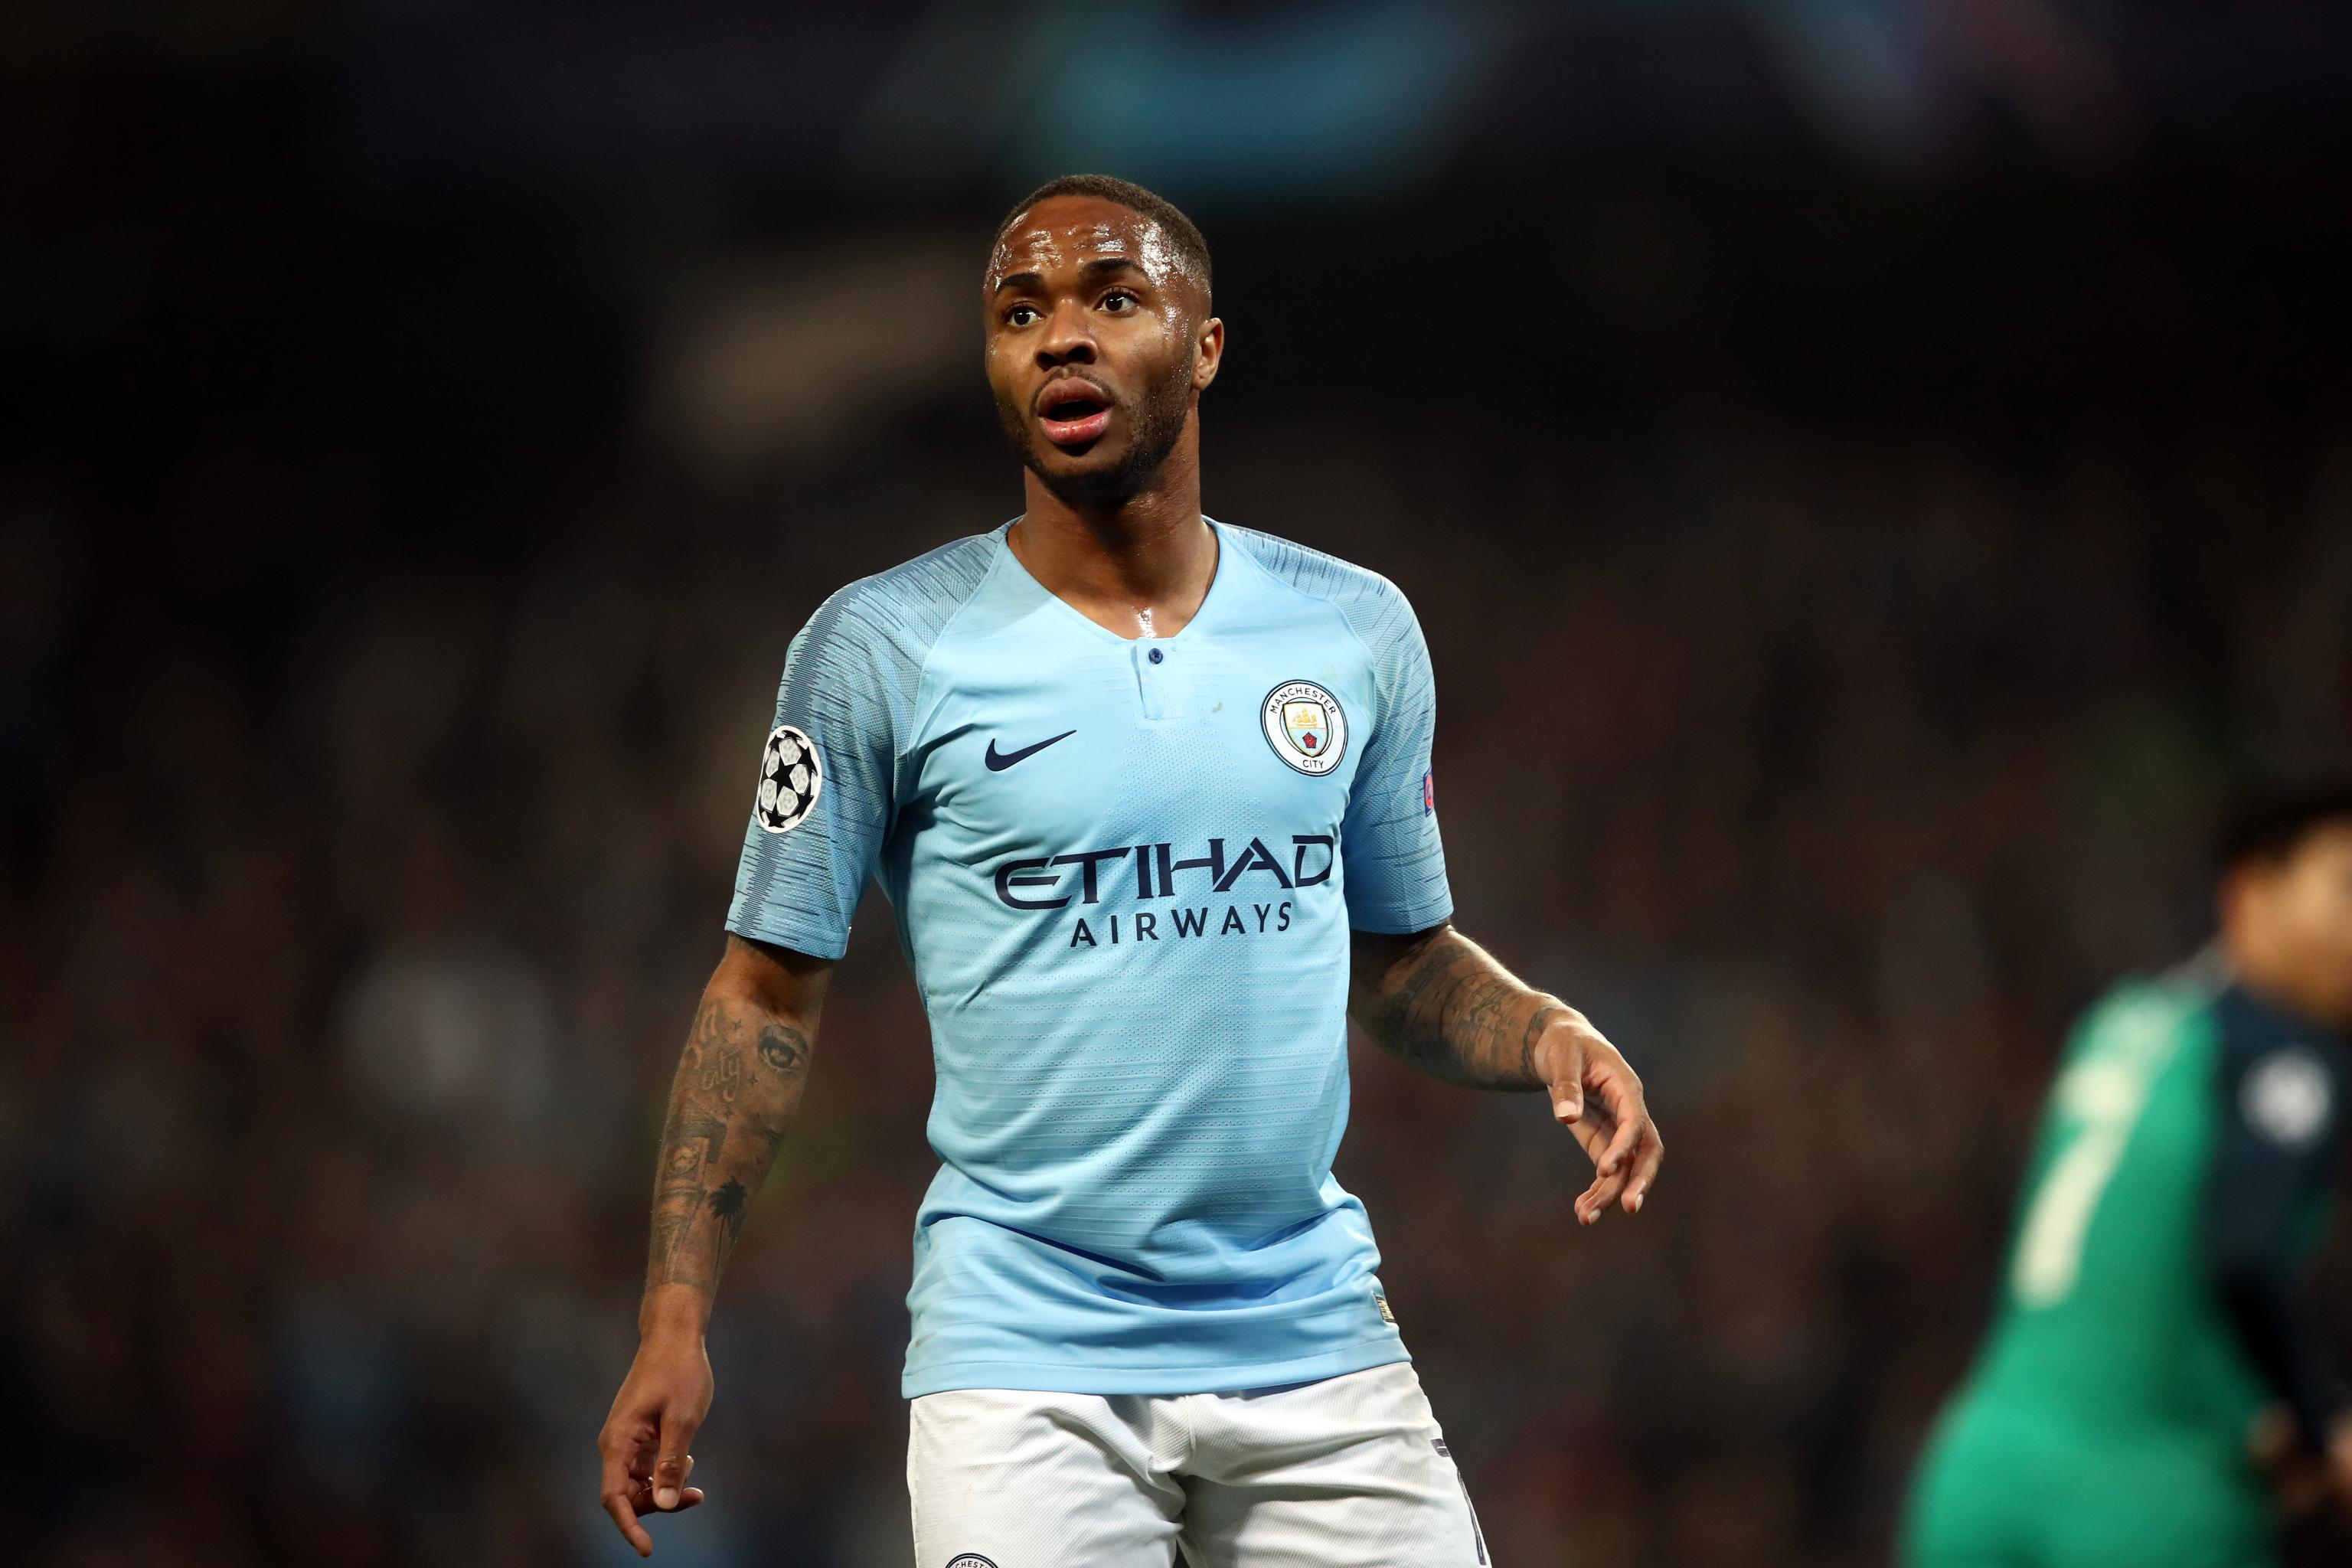 Raheem Sterling Says Racism in Football Is 'Nowhere Near Being Sorted'